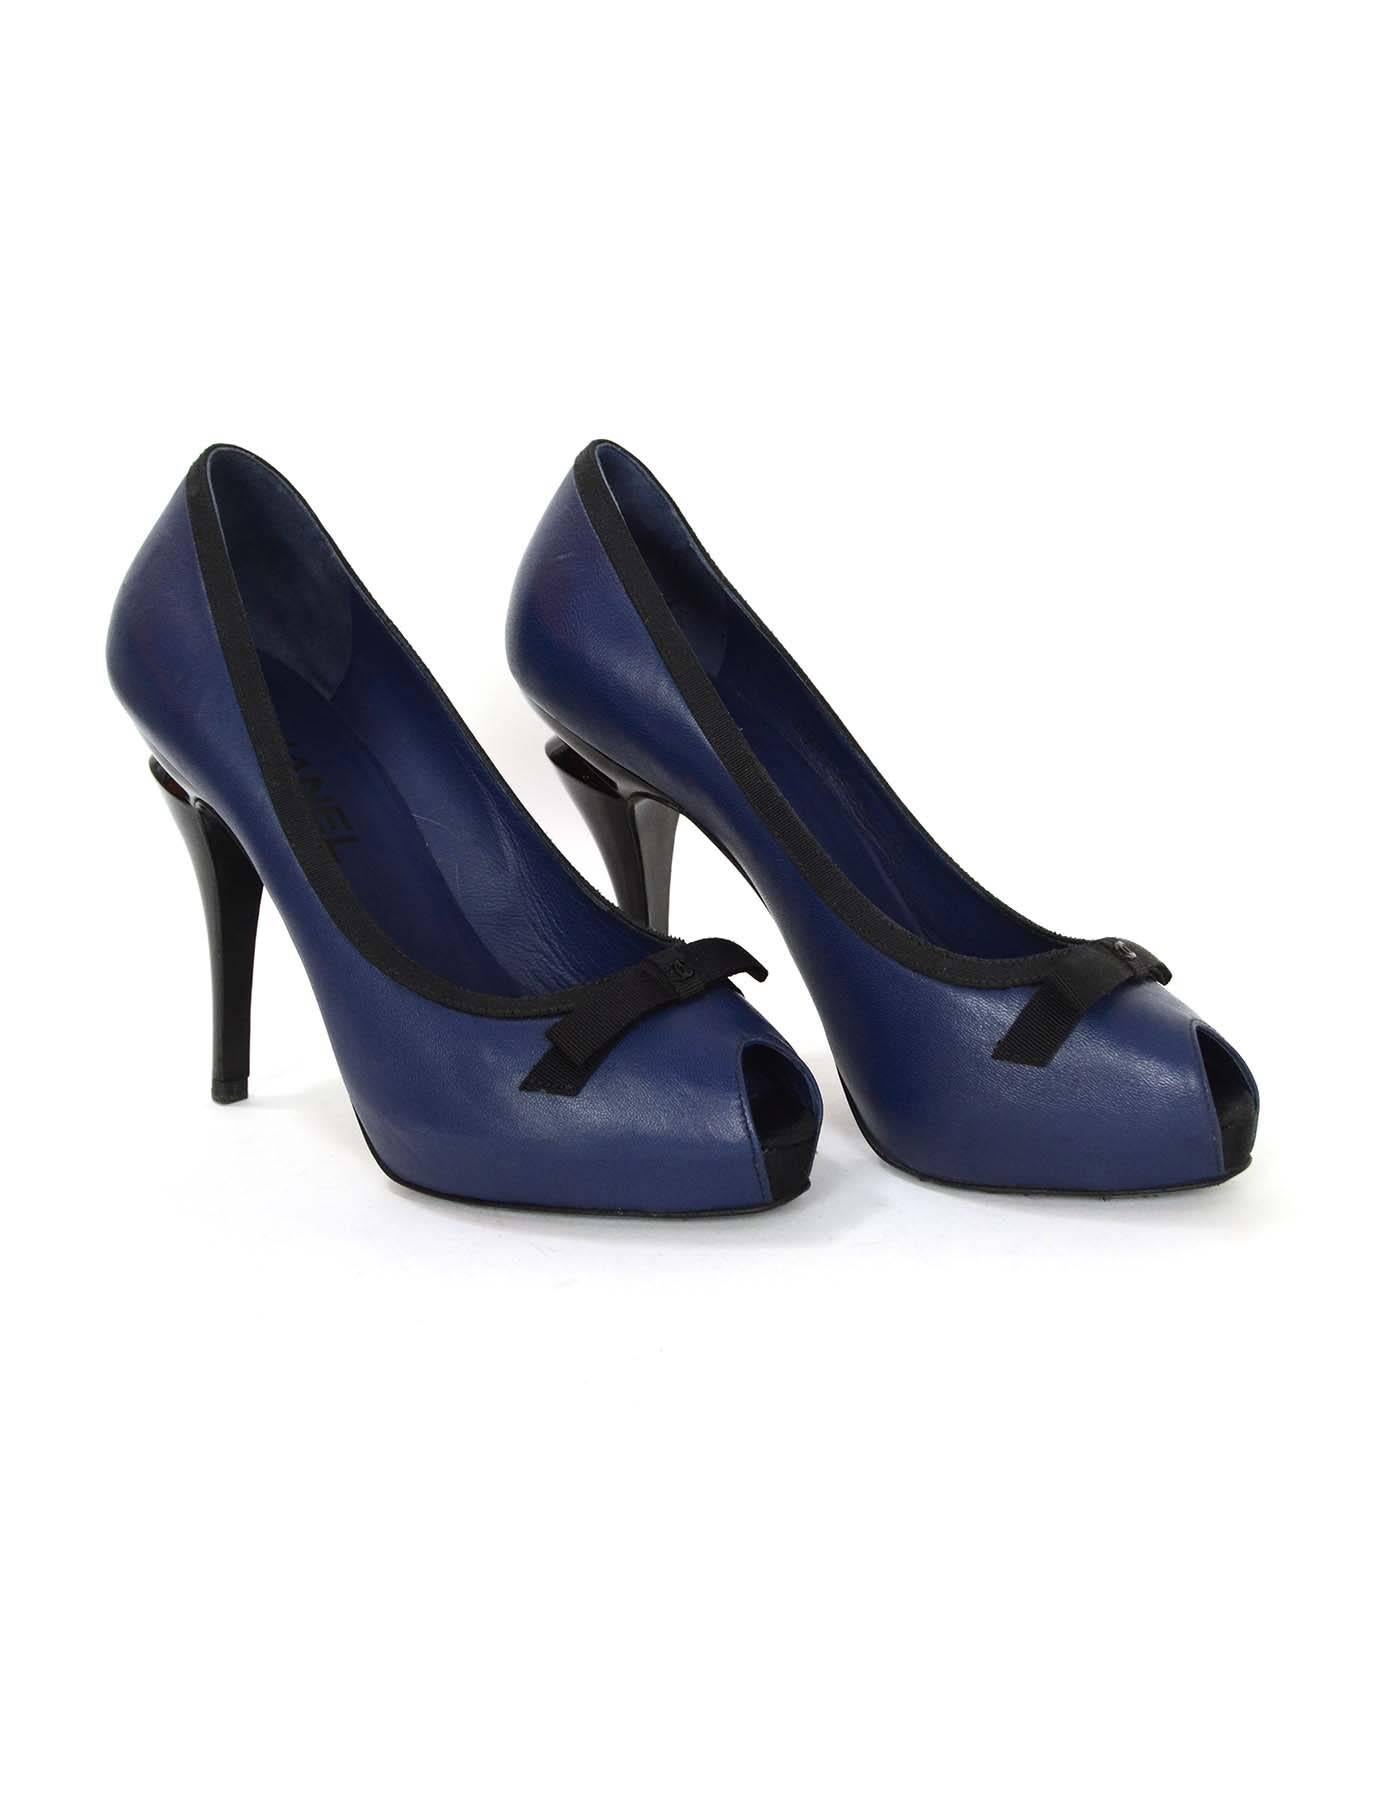 Chanel Navy & Black Peep Toe Pumps sz 36.5
Features Chanel CC charm on bow with black grosgrain trim detailing

Made in: Italy
Color: Navy and black
Composition: Leather and grosgrain
Sole Stamp: CC Made in Italy 36 1/2 C
Closure/opening: